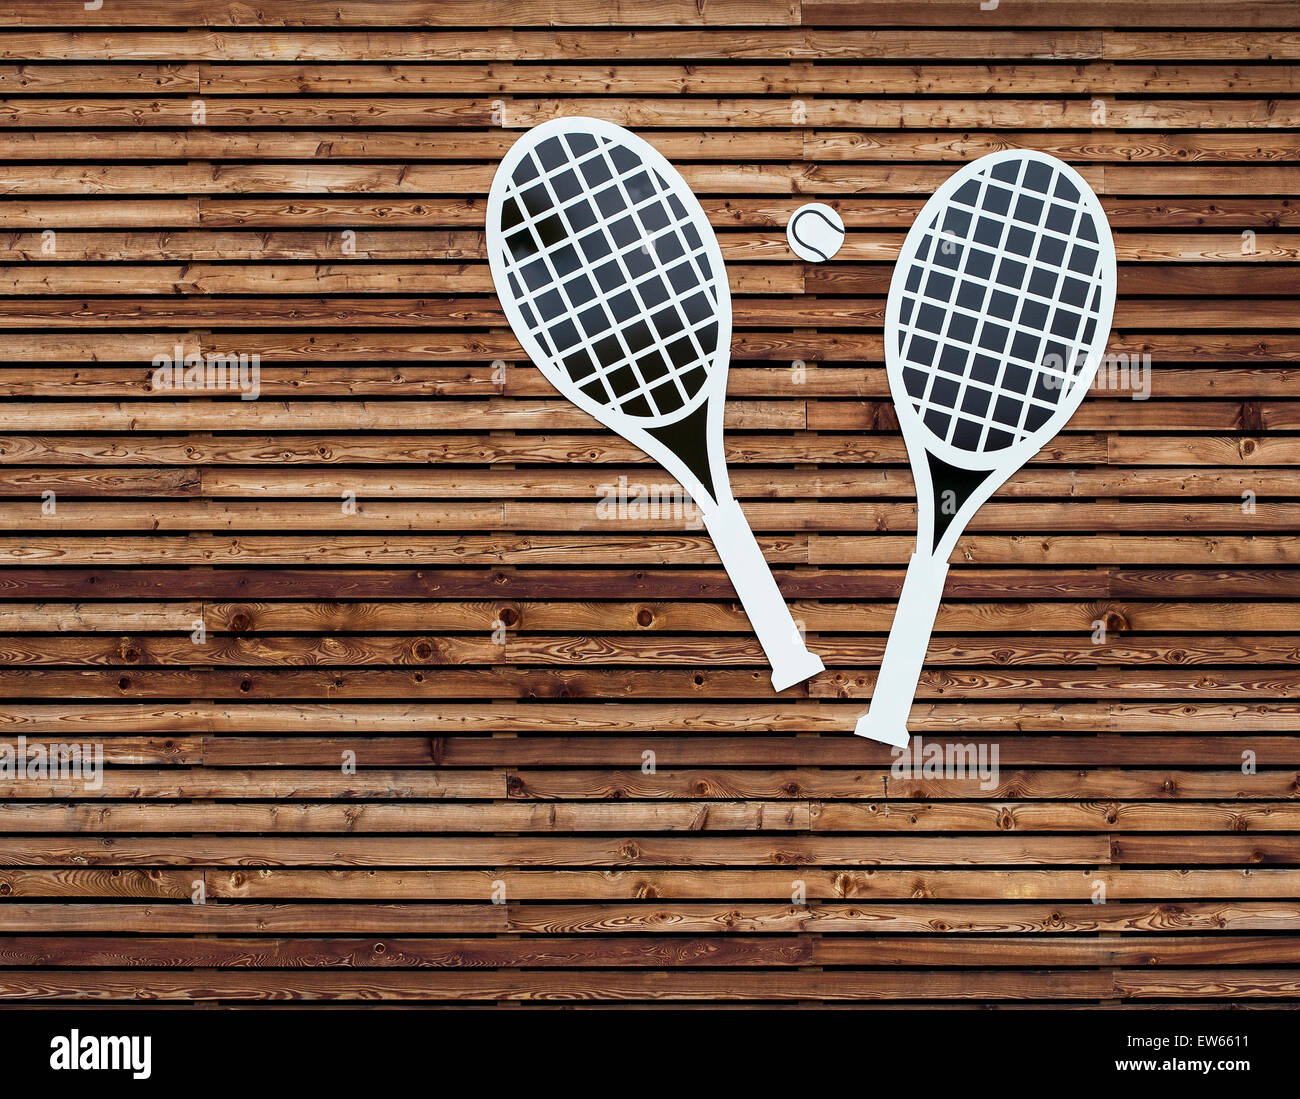 Tennis Rackets on a wooden wall. Stock Photo